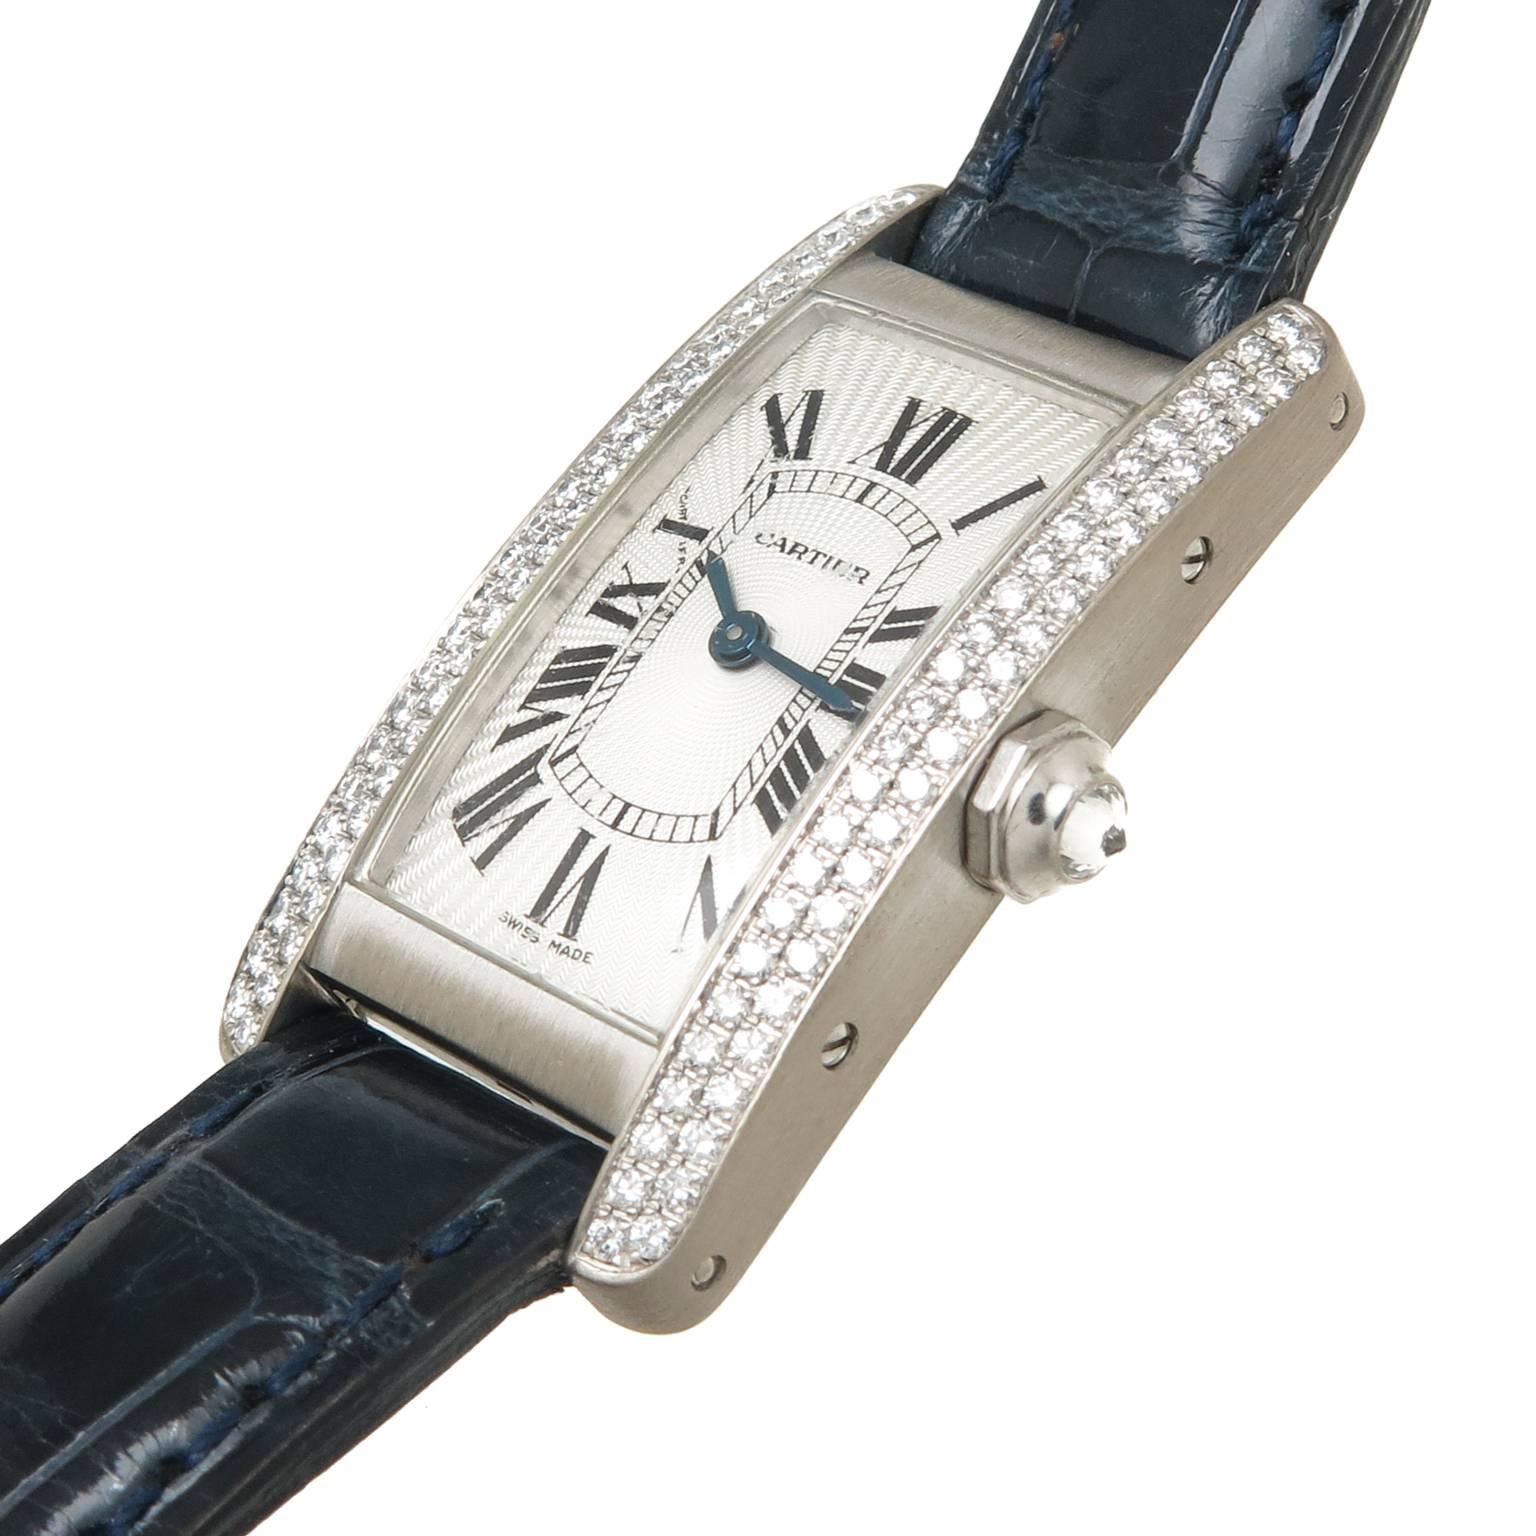 Circa 2005 Cartier Tank Americaine, 34 X 19 MM 18K White Gold Water resistant case Case, Double Row Factory set Diamonds and a Diamond Crown. Quartz Movement, silvered Engine turned Guilloche Dial. Cartier Dark Blue Textured Strap with Original